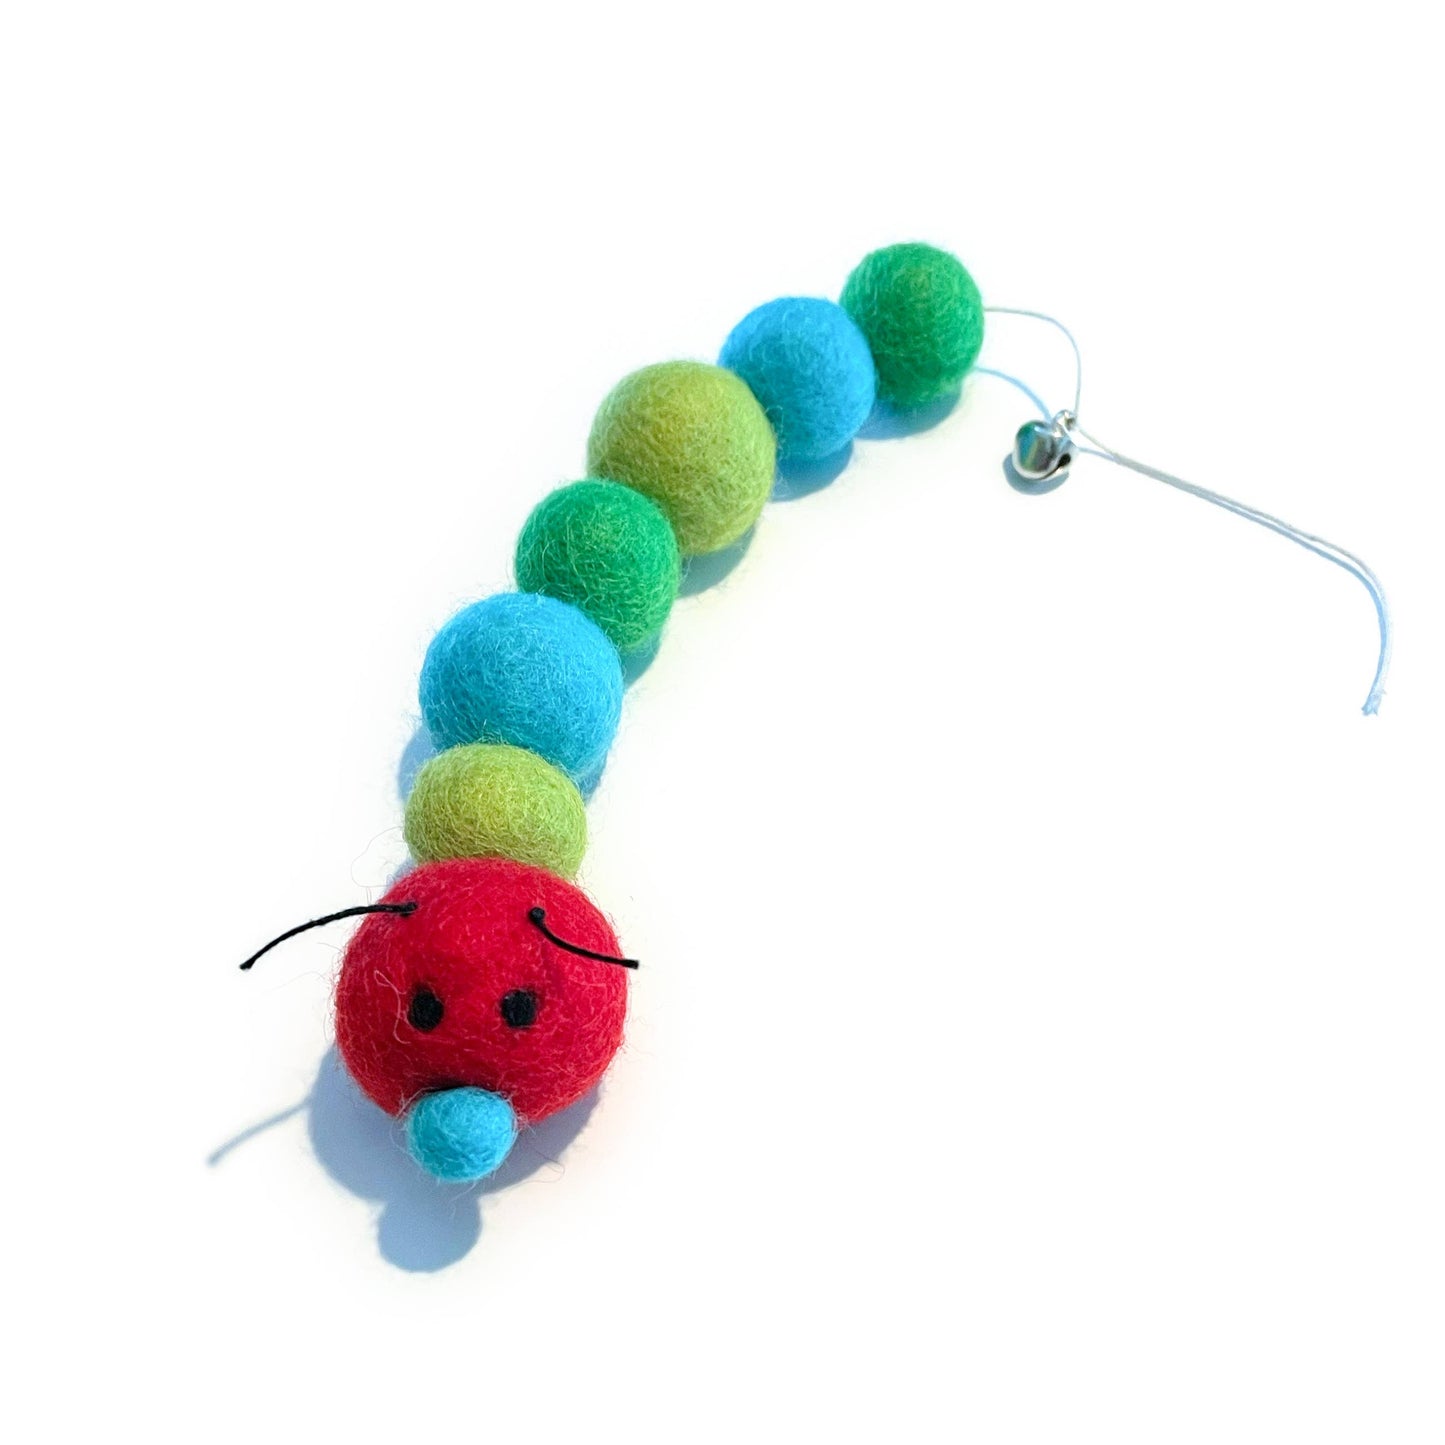 HUNGRY Kat the Caterpillar - Eco Toy (green-red-blue)